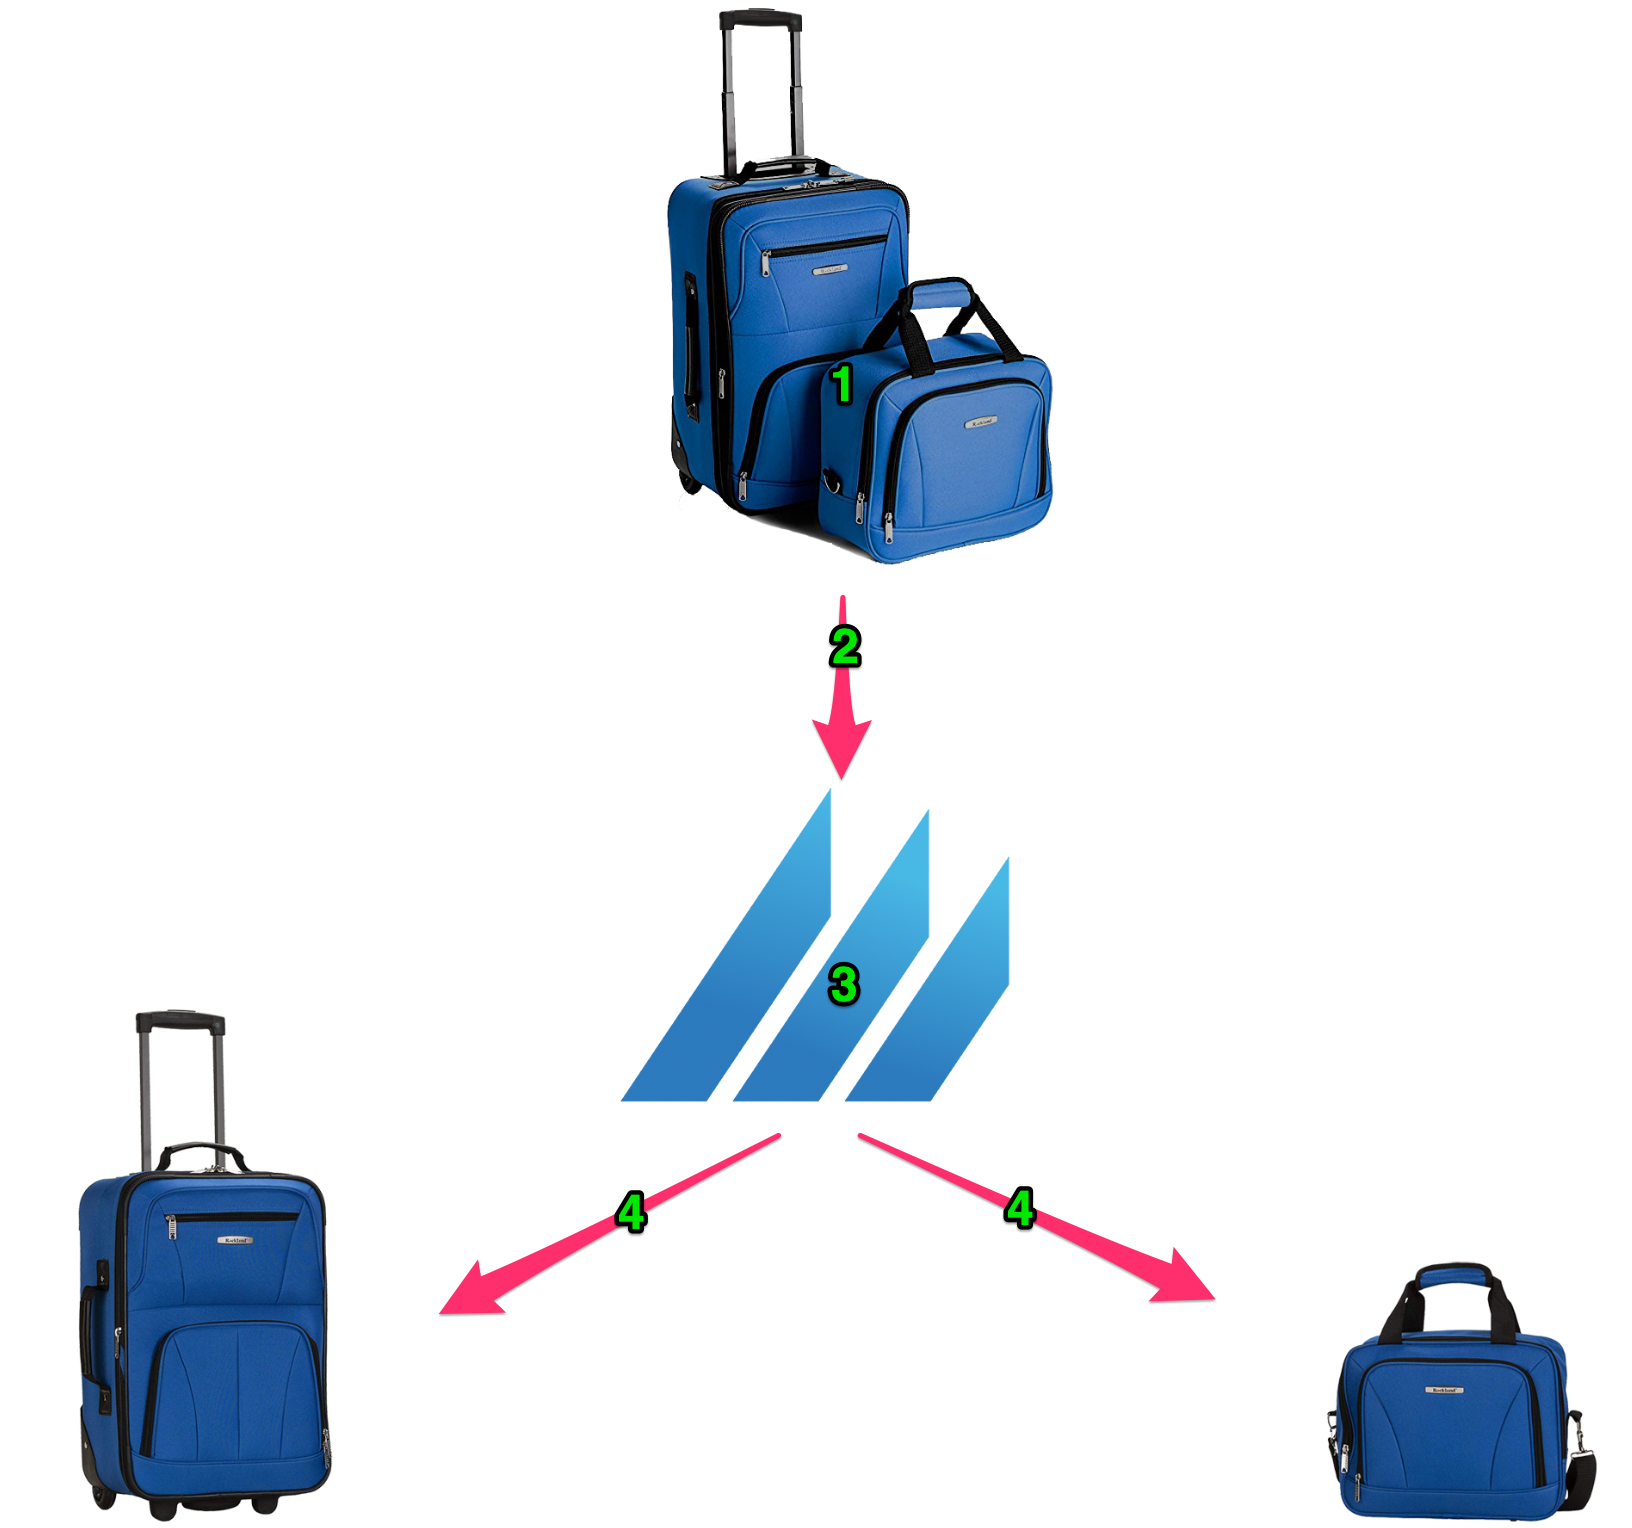 Luggage_Example_psd___86_1___Layer_3__RGB_8___.png